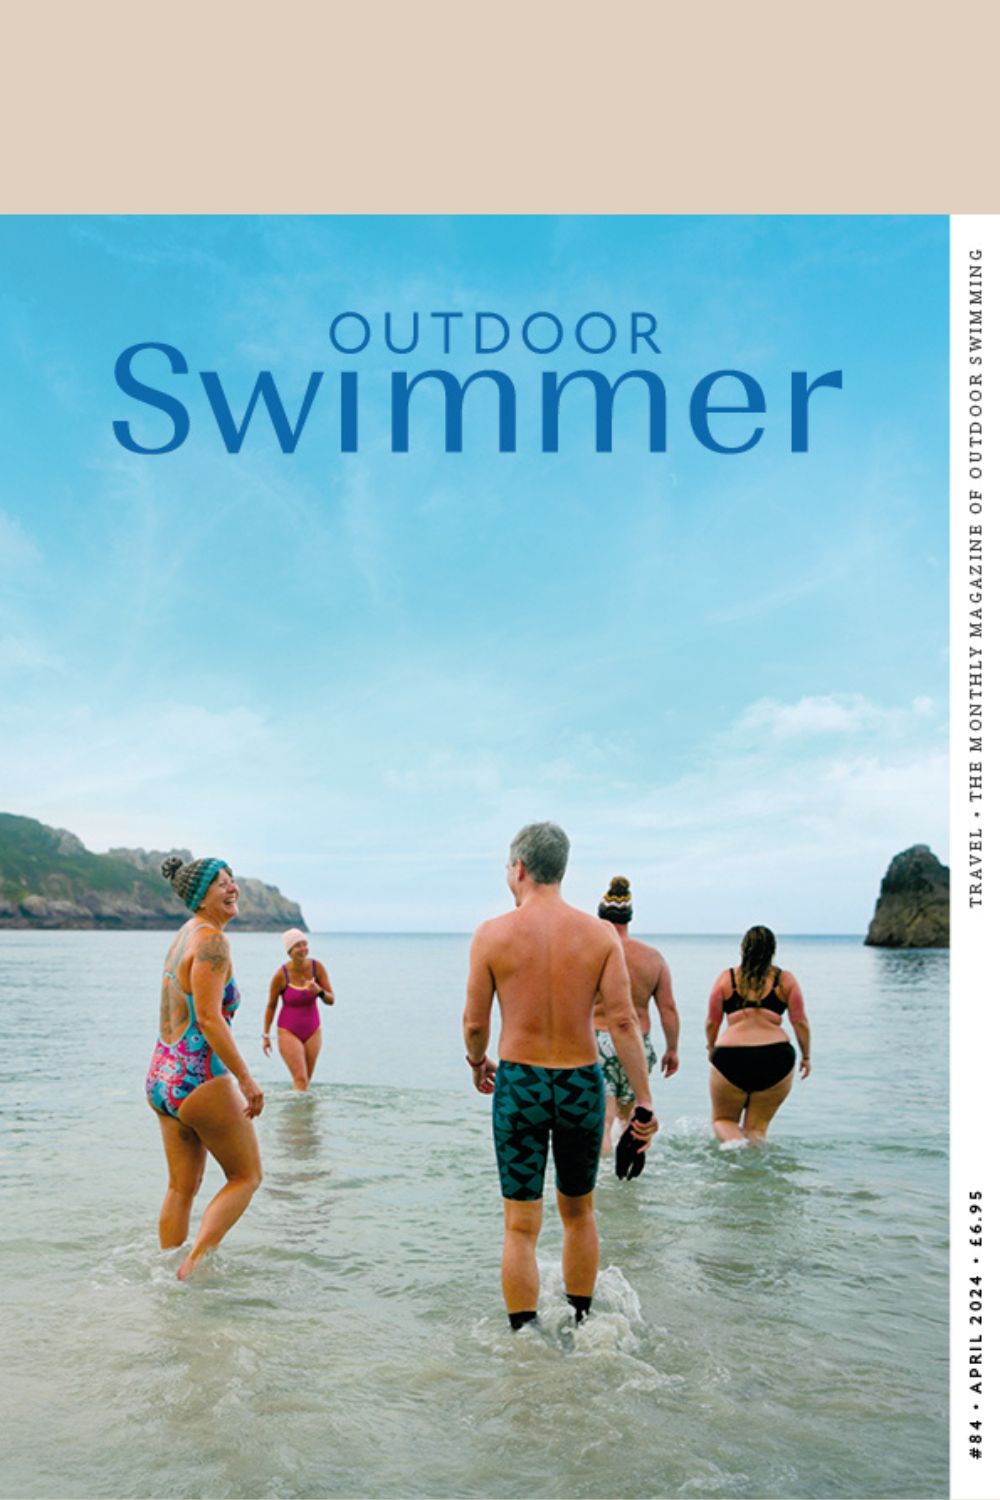 Outdoor Swimming #84 cover (five adults wading in the sea)